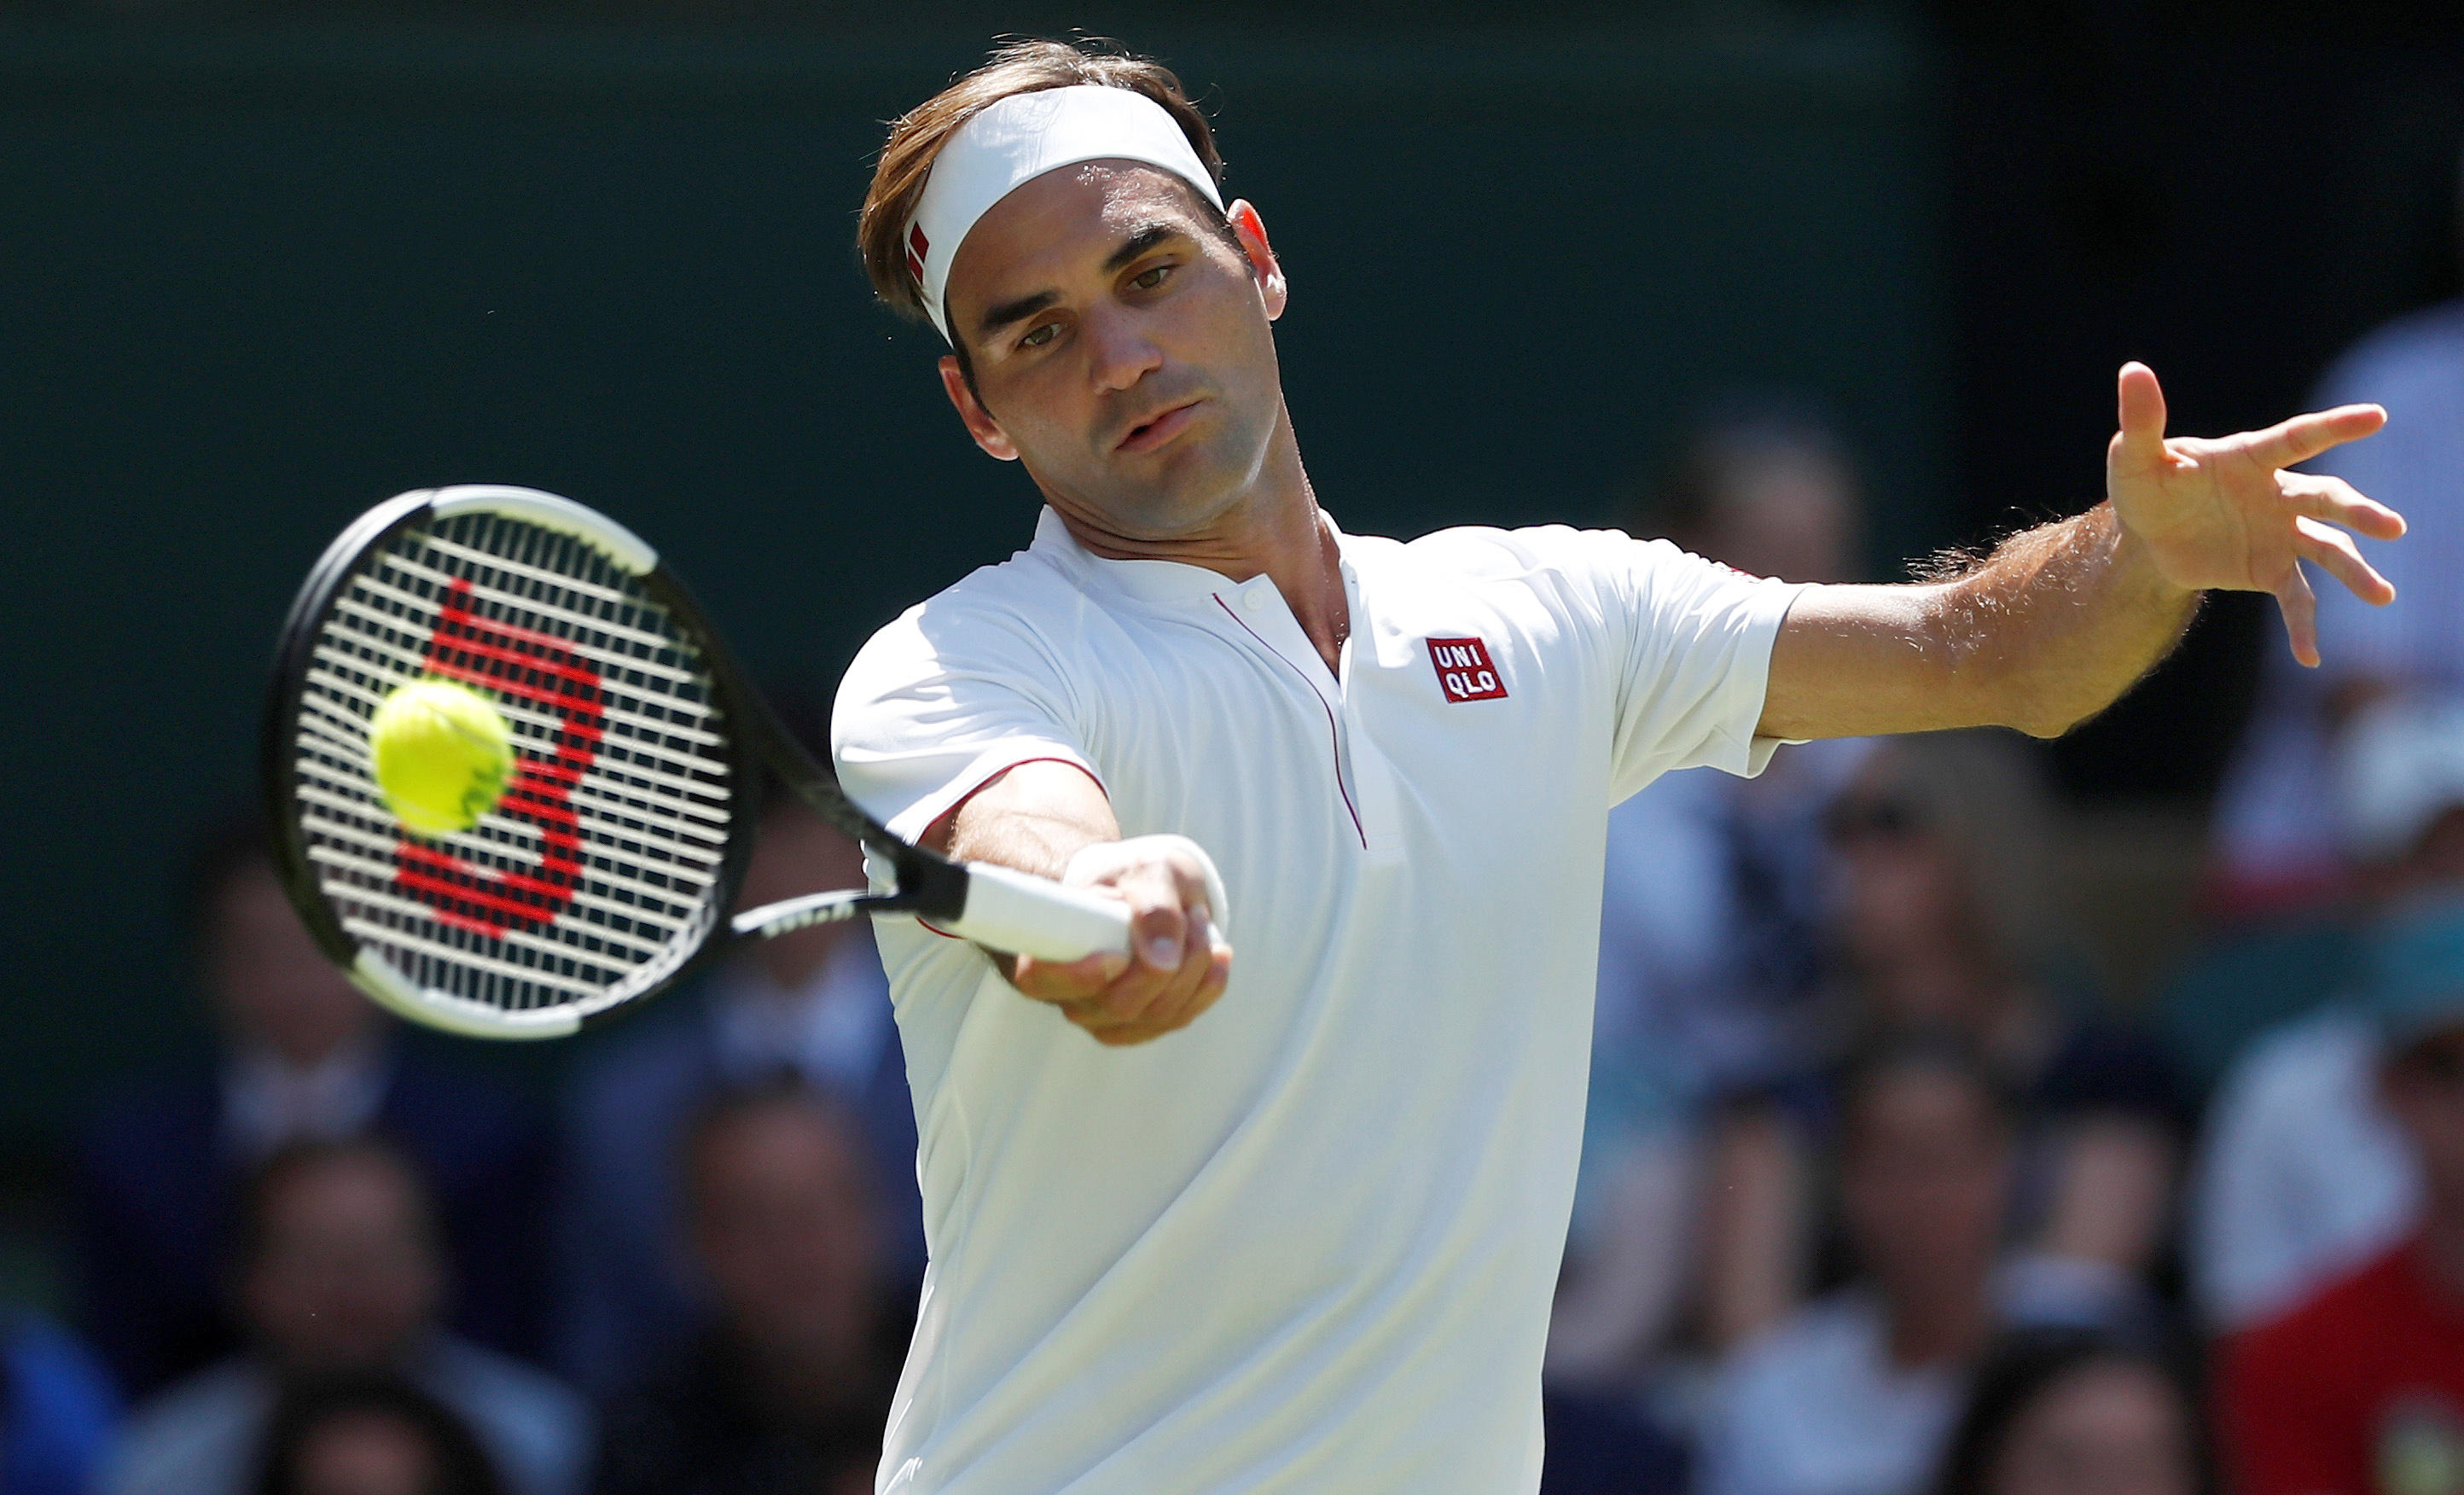 Roger Federer, Uniqlo partner at Wimbledon in reported $300 million deal -  CBS News